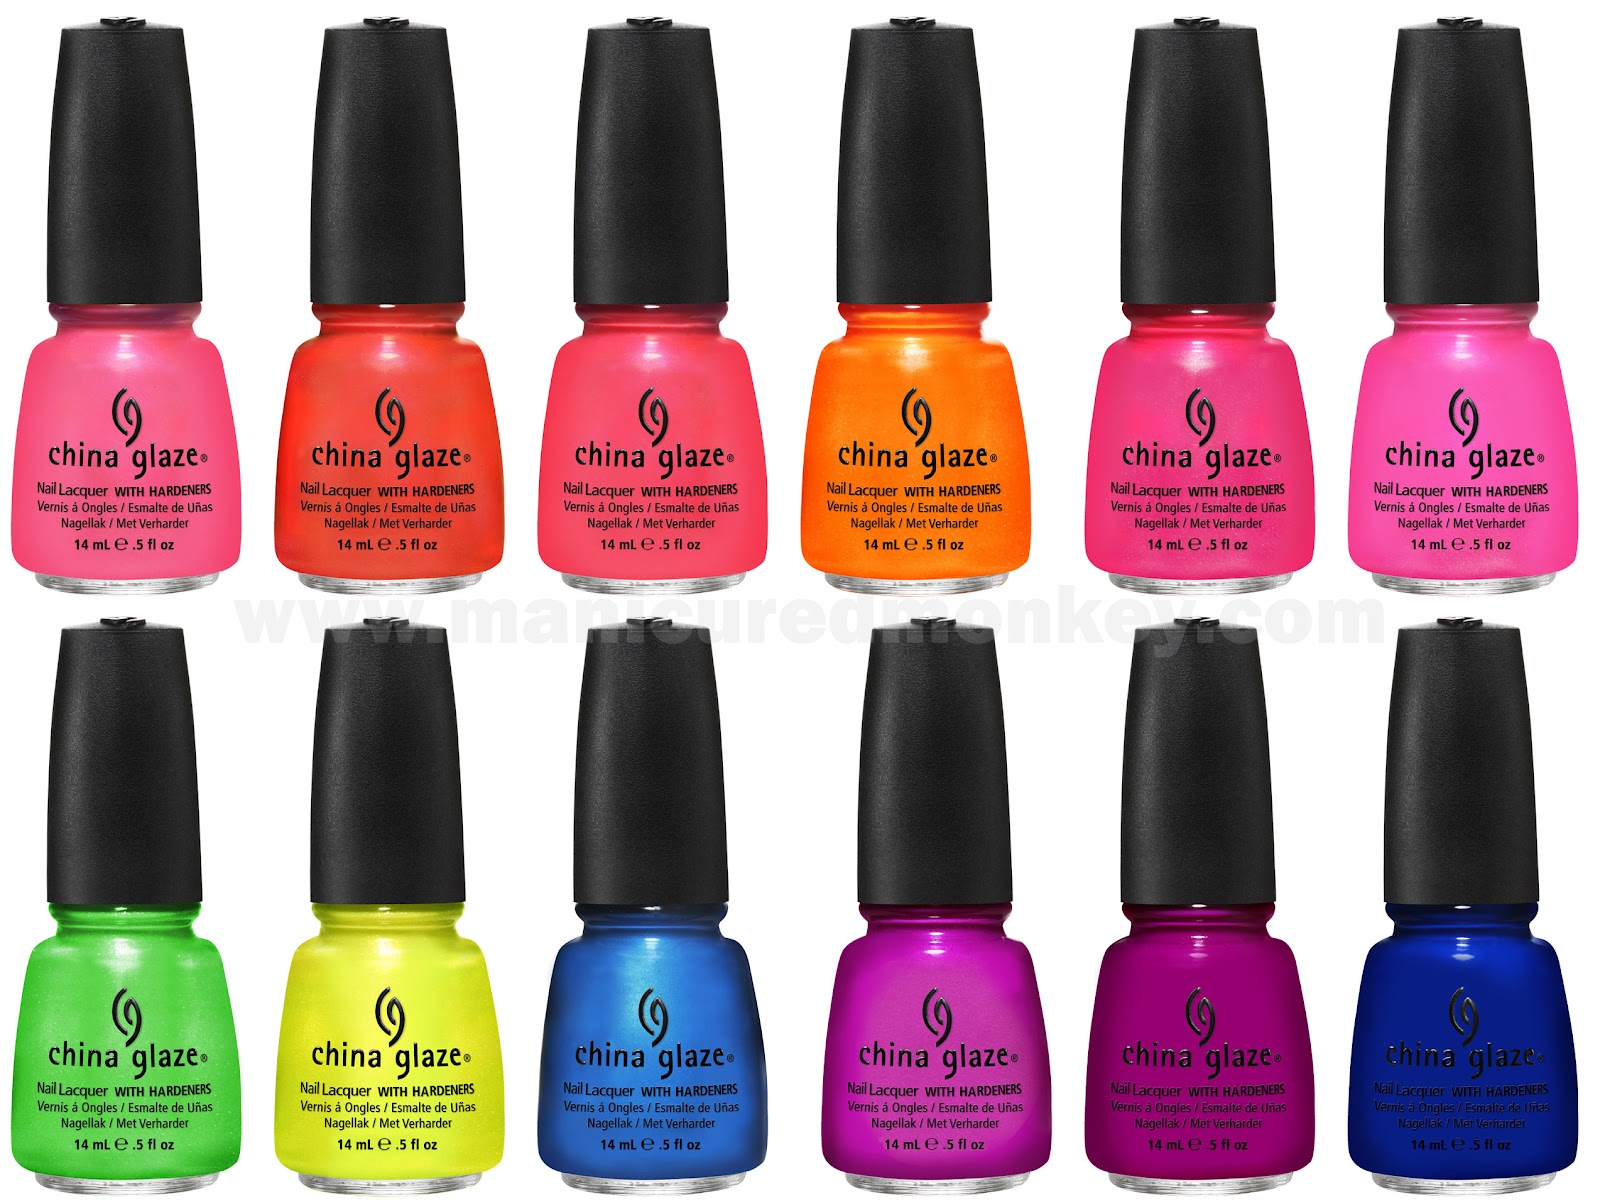 9. China Glaze Nail Lacquer with Antifungal Medication - wide 2